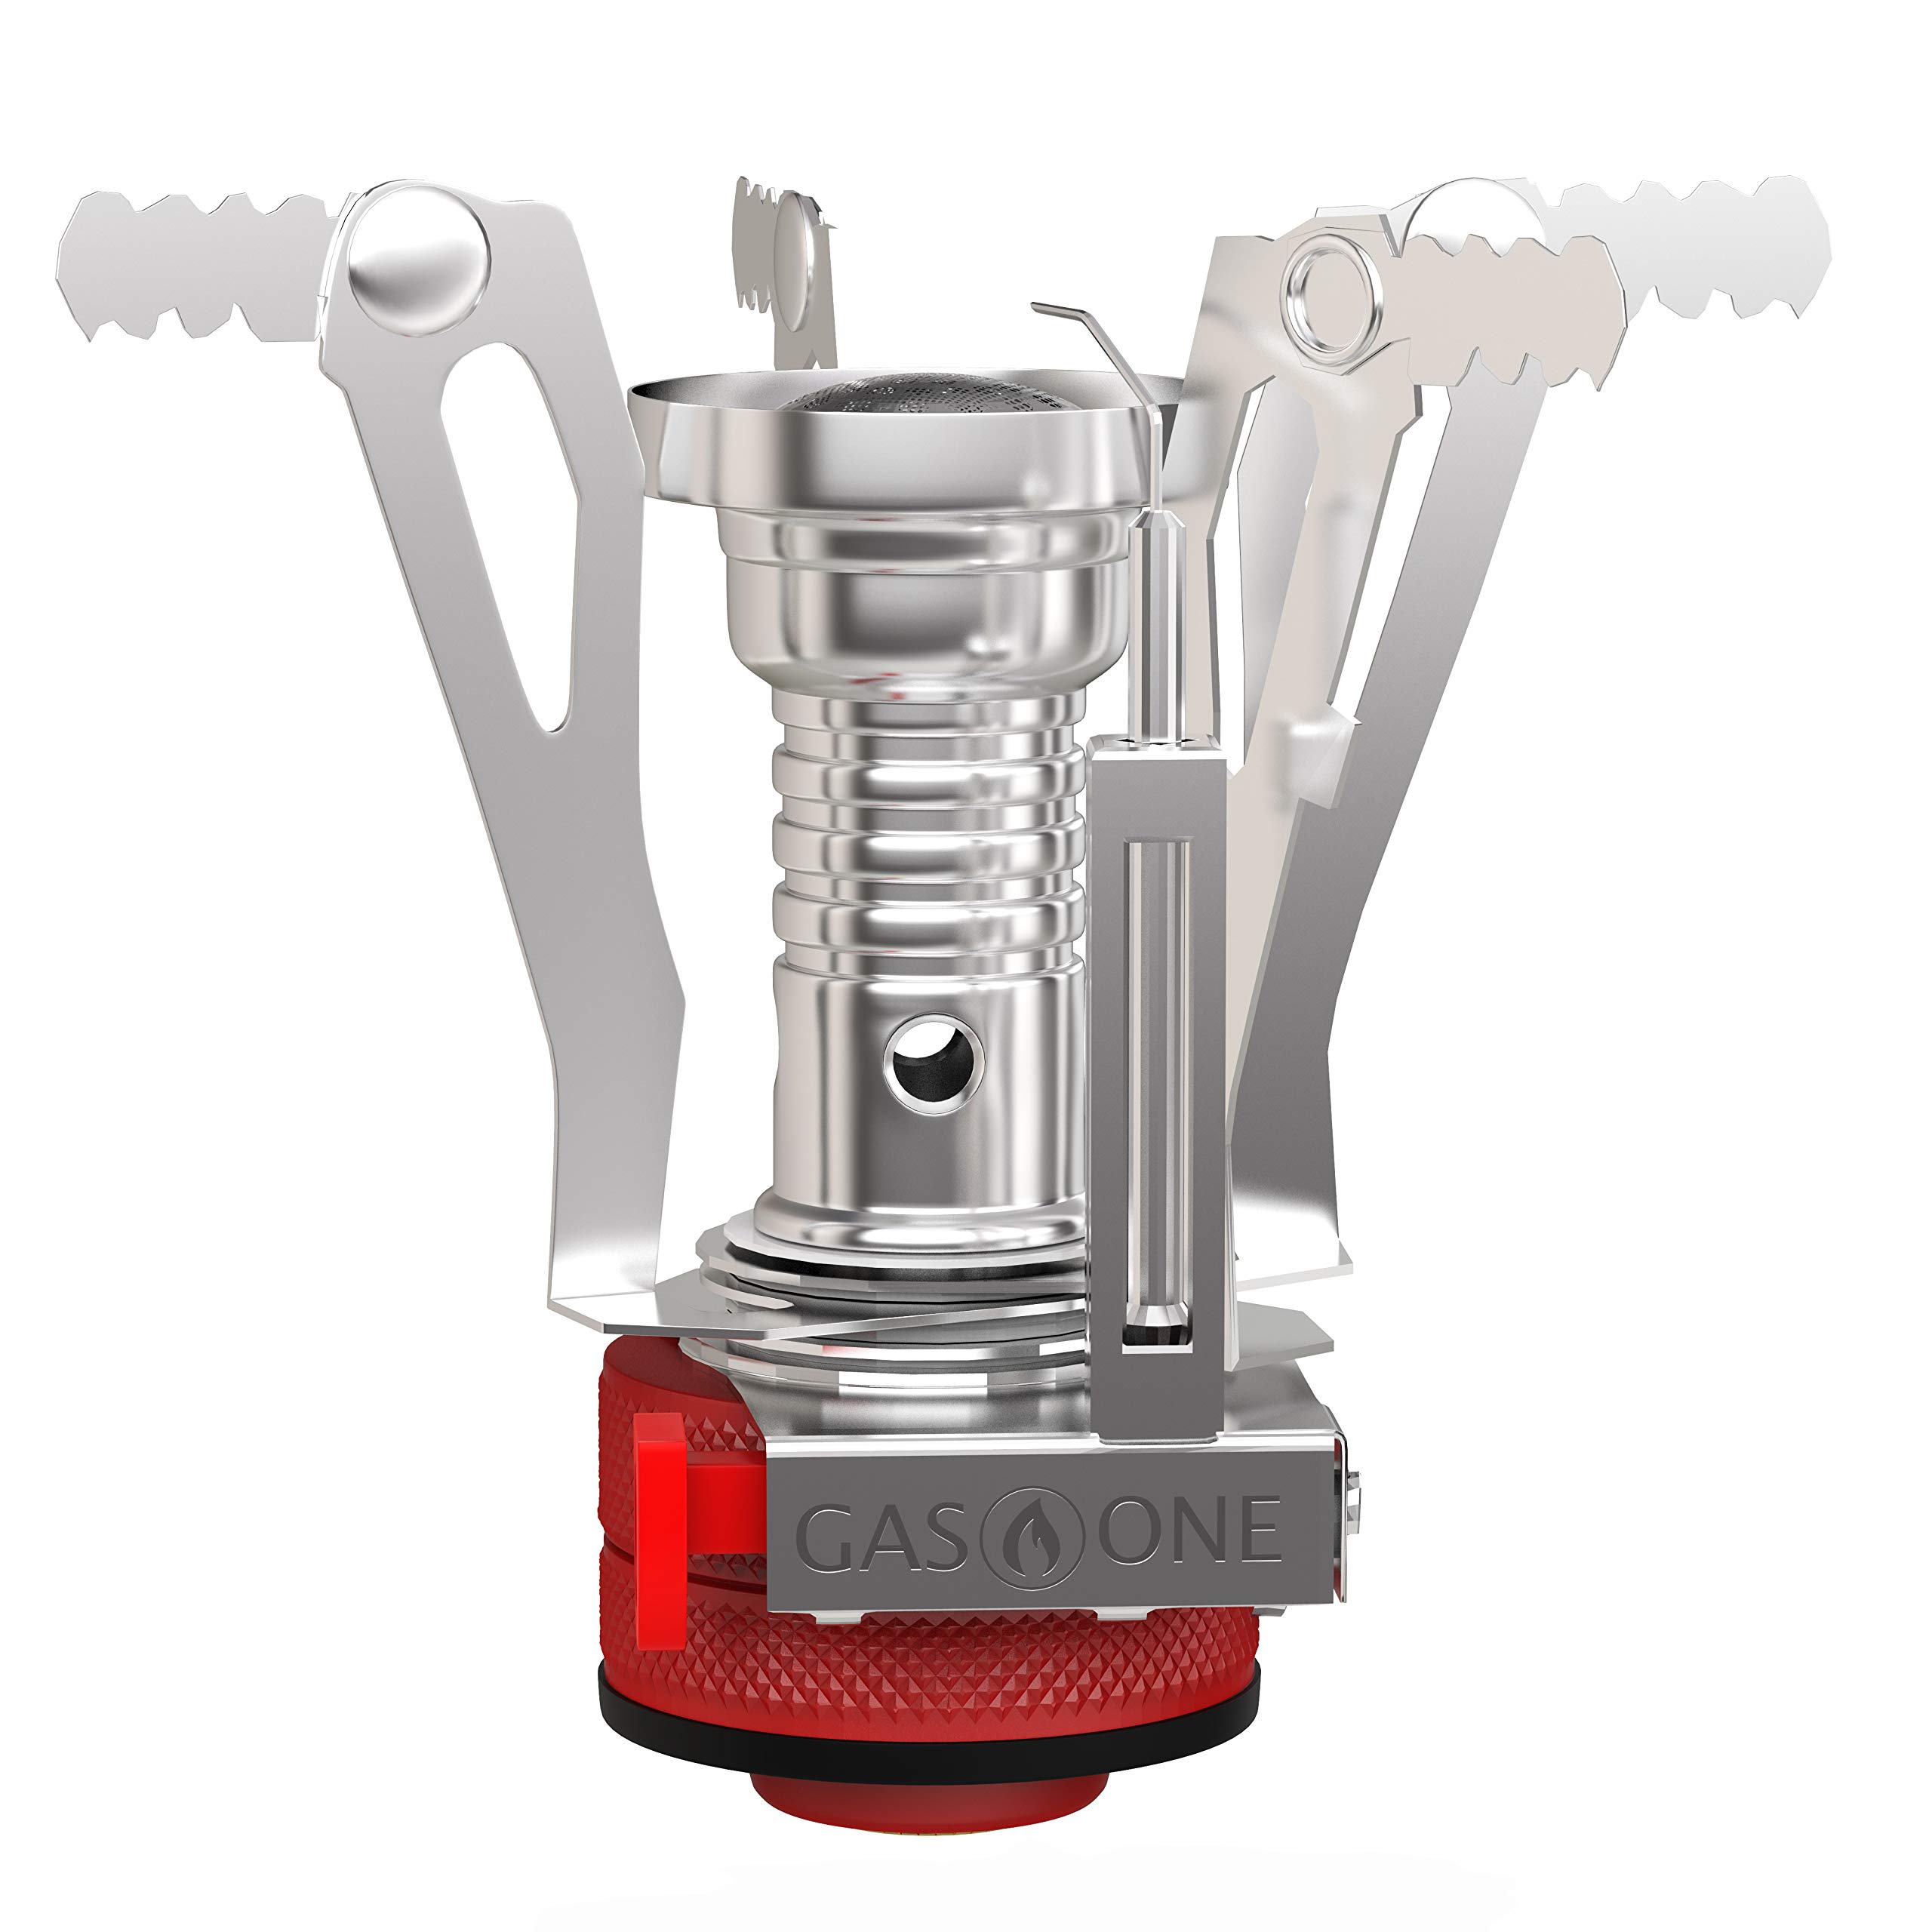 Gas One Backpacking Camping Stove - Pocket Rocket Stove with Piezo Ignition and Case for Isobutane fuel $7.99